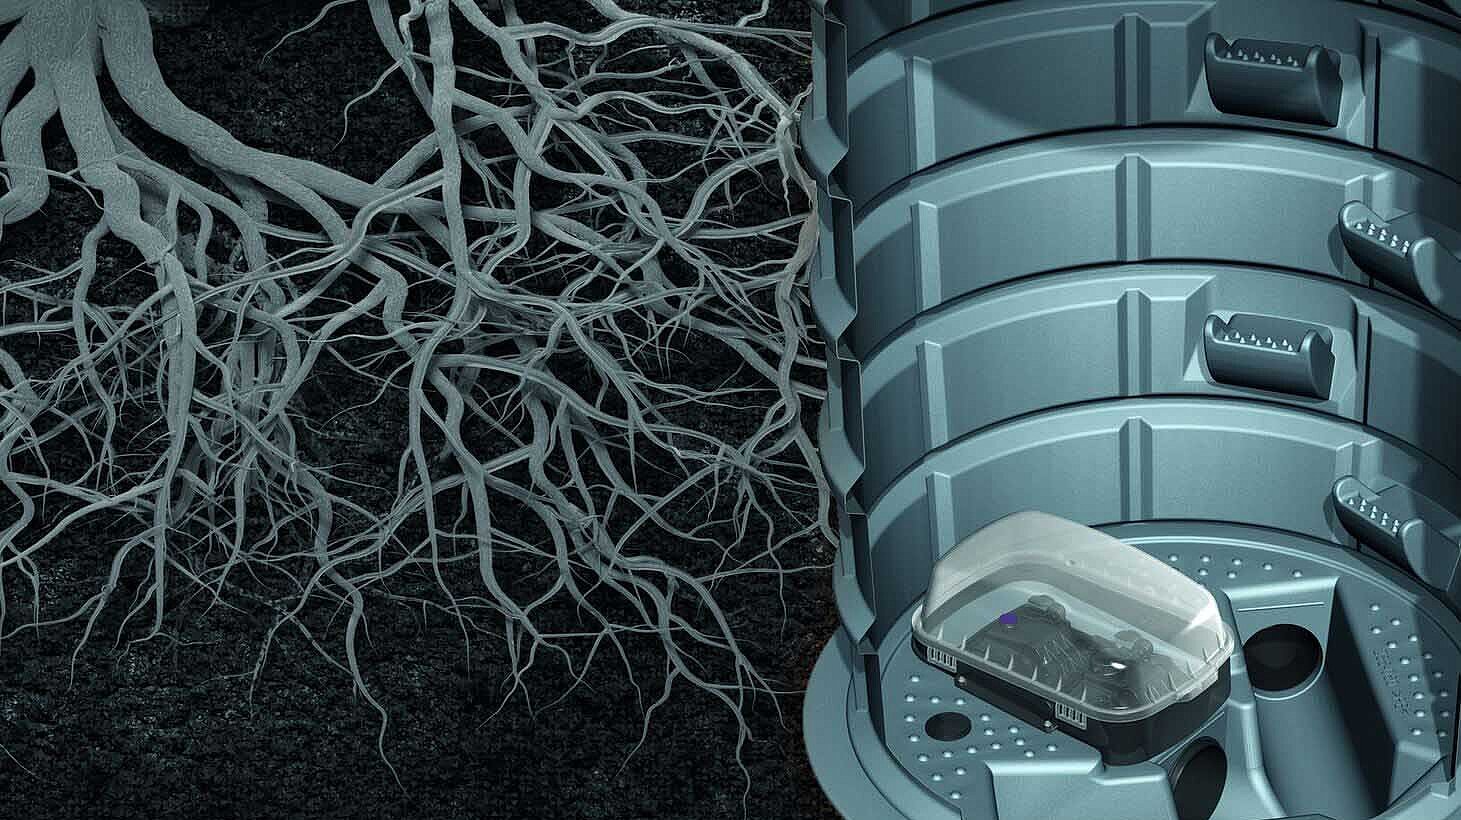 Permanently leak-proof and root-resistant thanks to the monolithic design